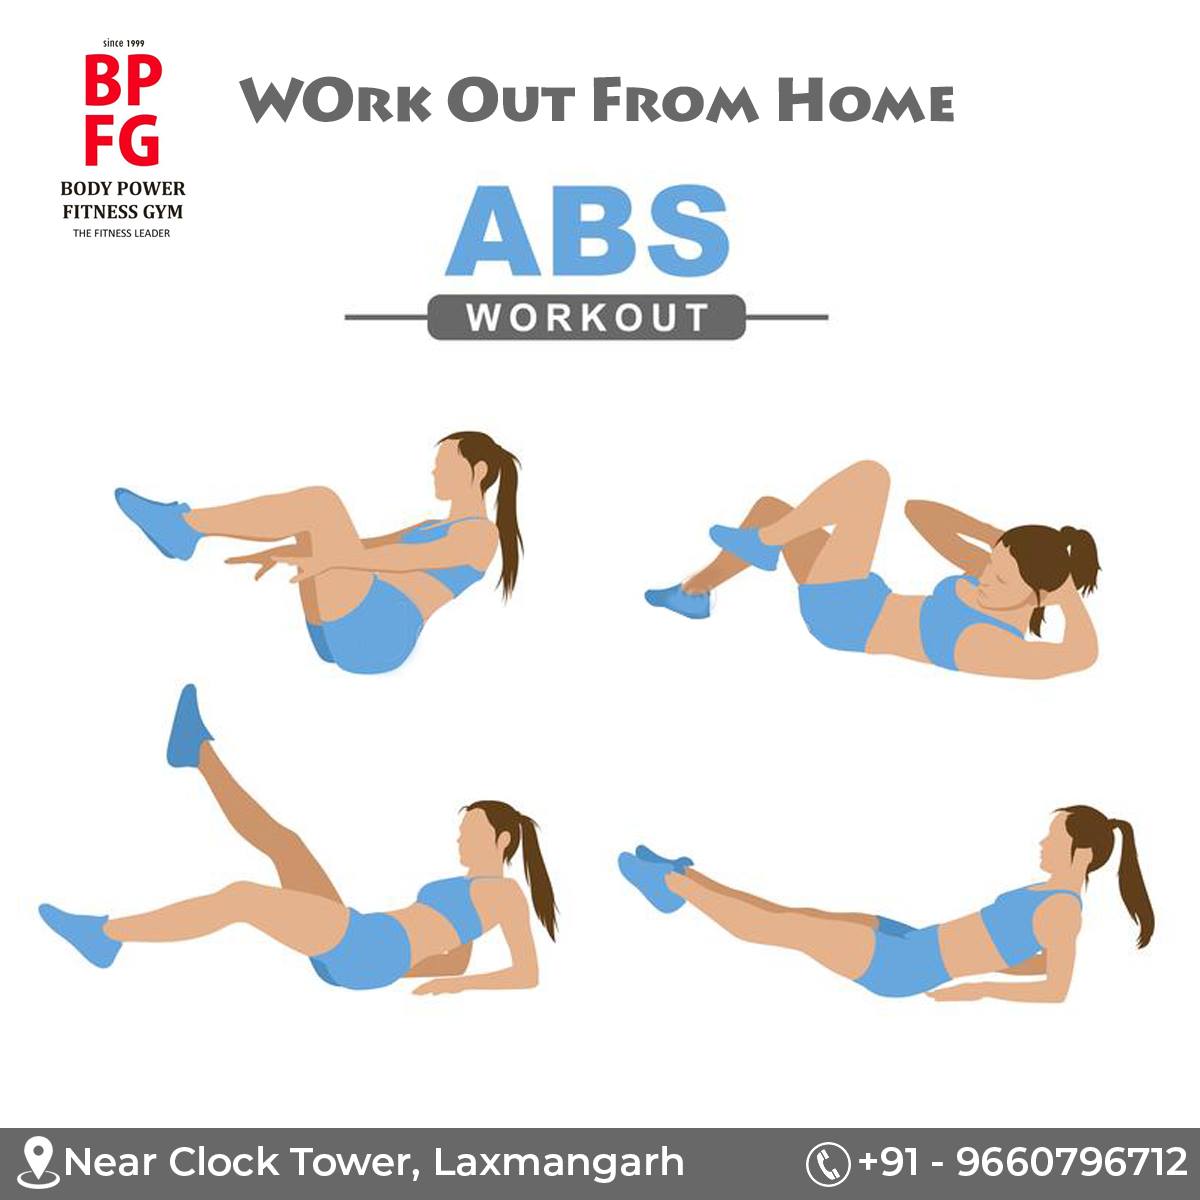 Work Out From Home! #ABS #StayHome #Stayfit #Staysafe  #Workout #Fitness